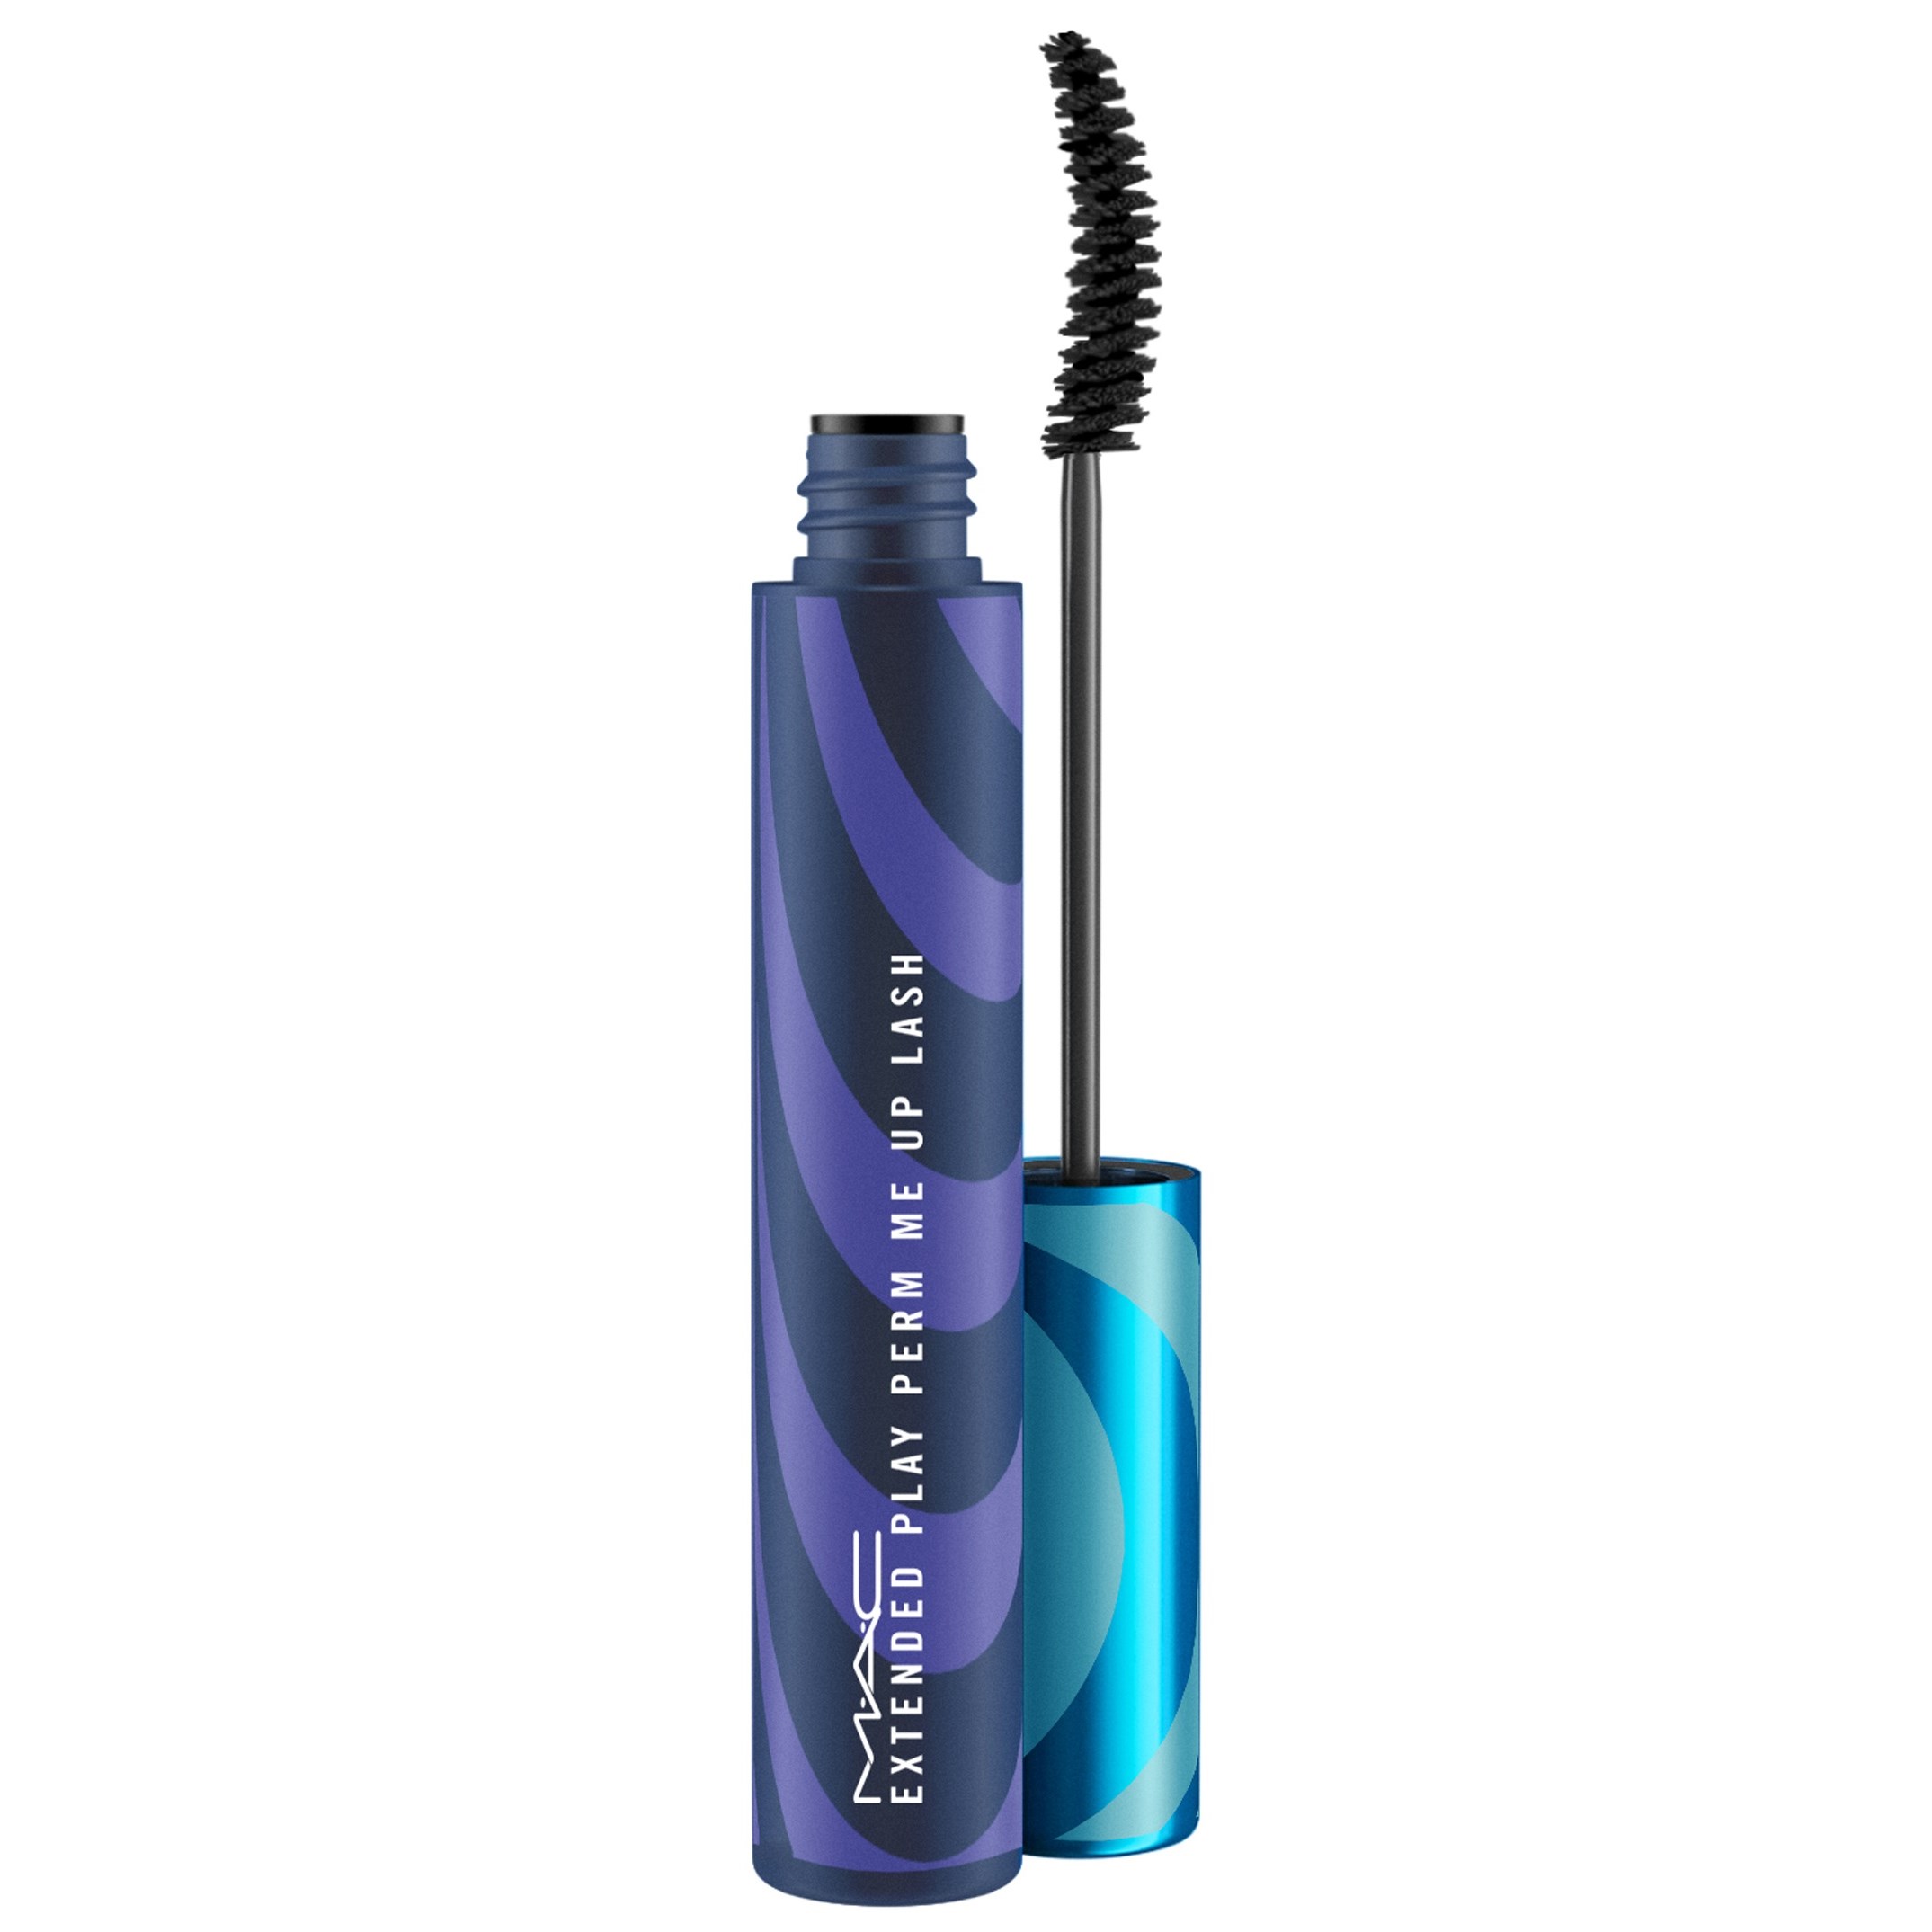 MAC Cosmetics Extended Play Extended Play Perm Me Up Lash